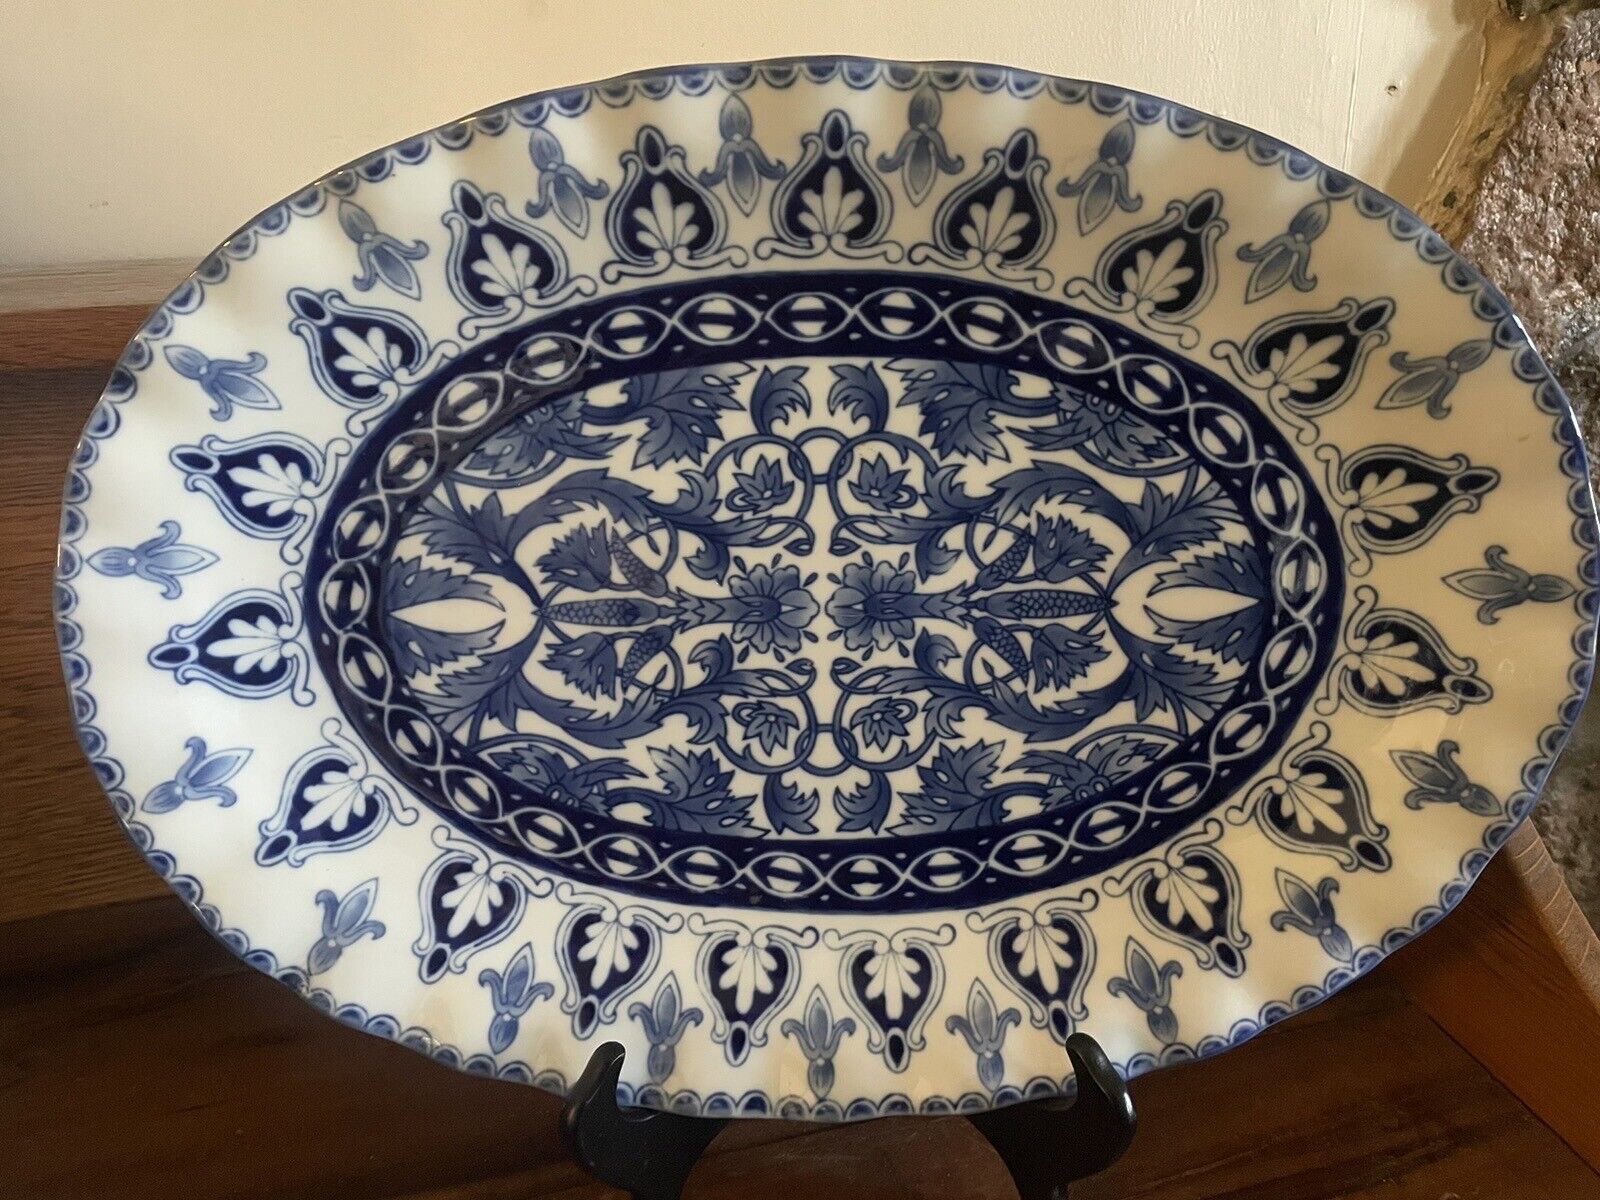 The Bombay Company Large Oval Blue and White Vintage Chinoiserie Platter